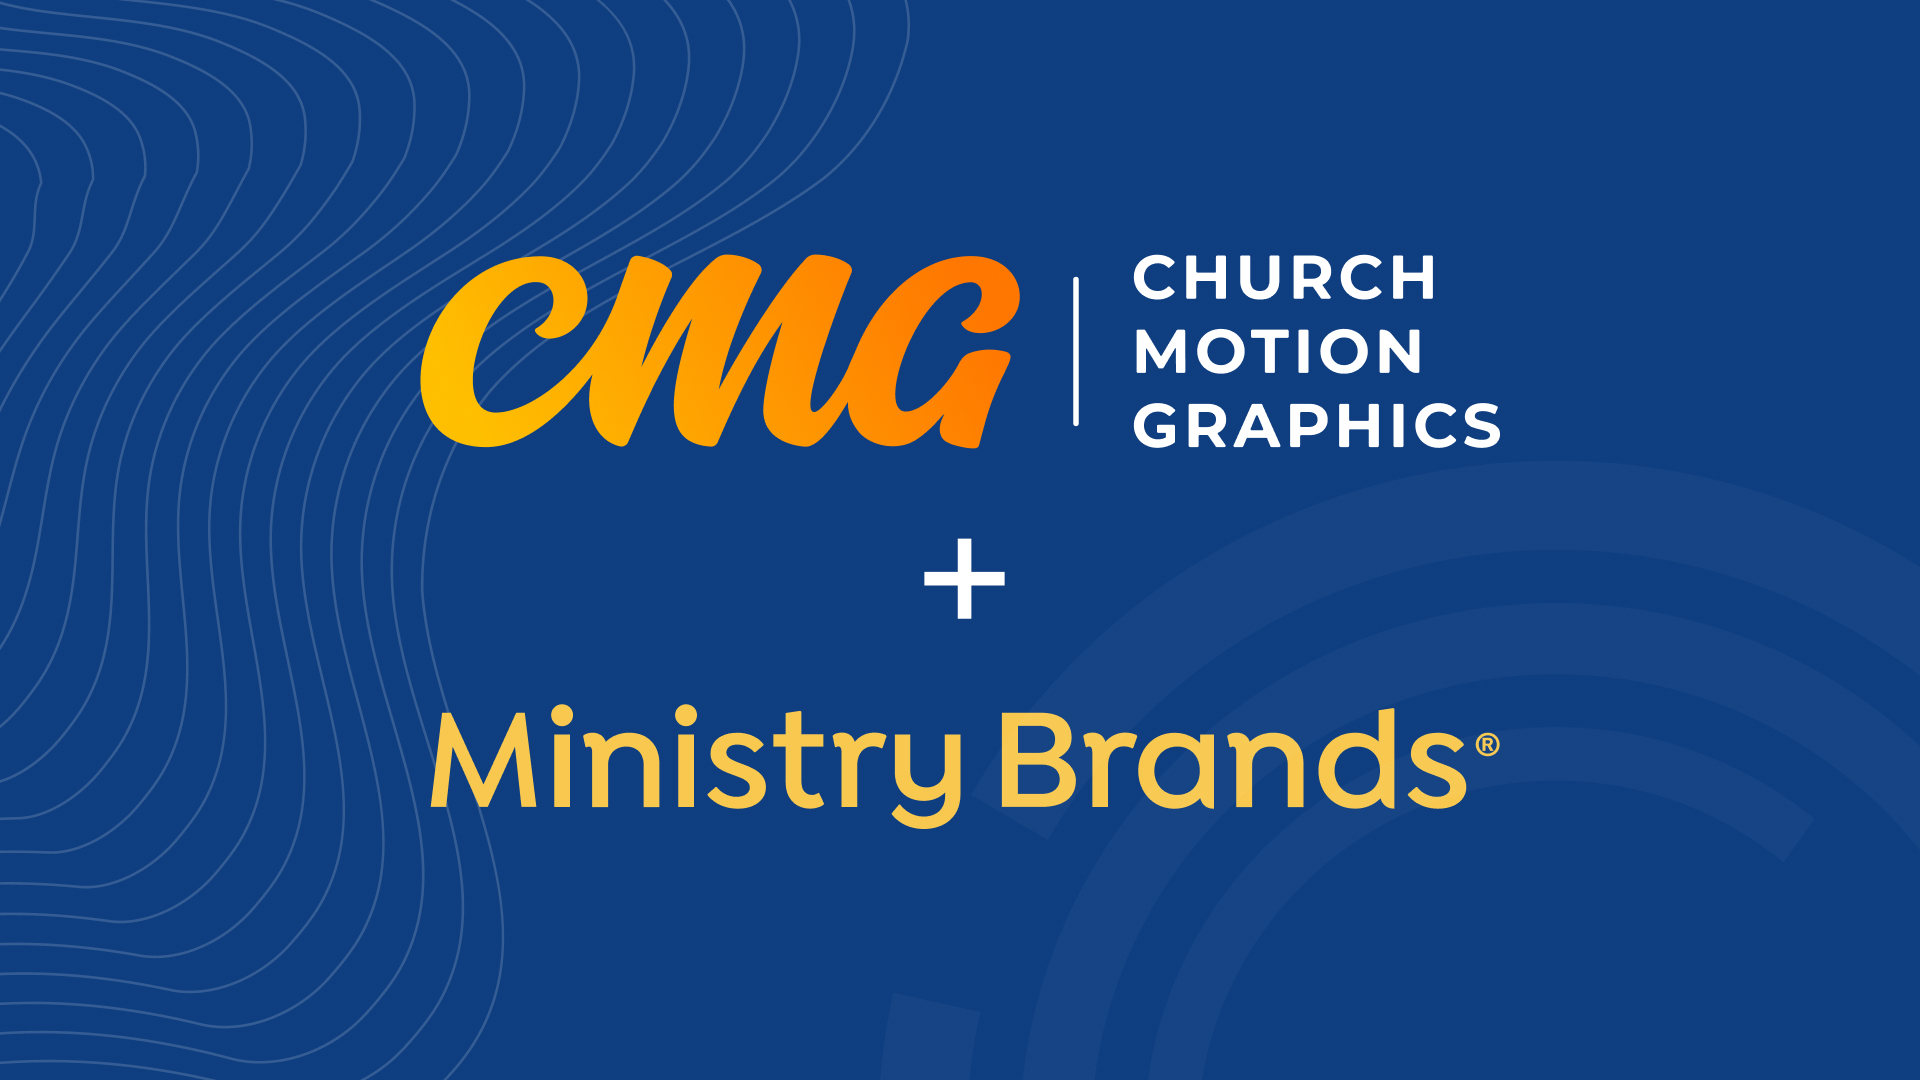 CMG Is Now Part of the Ministry Brands Family